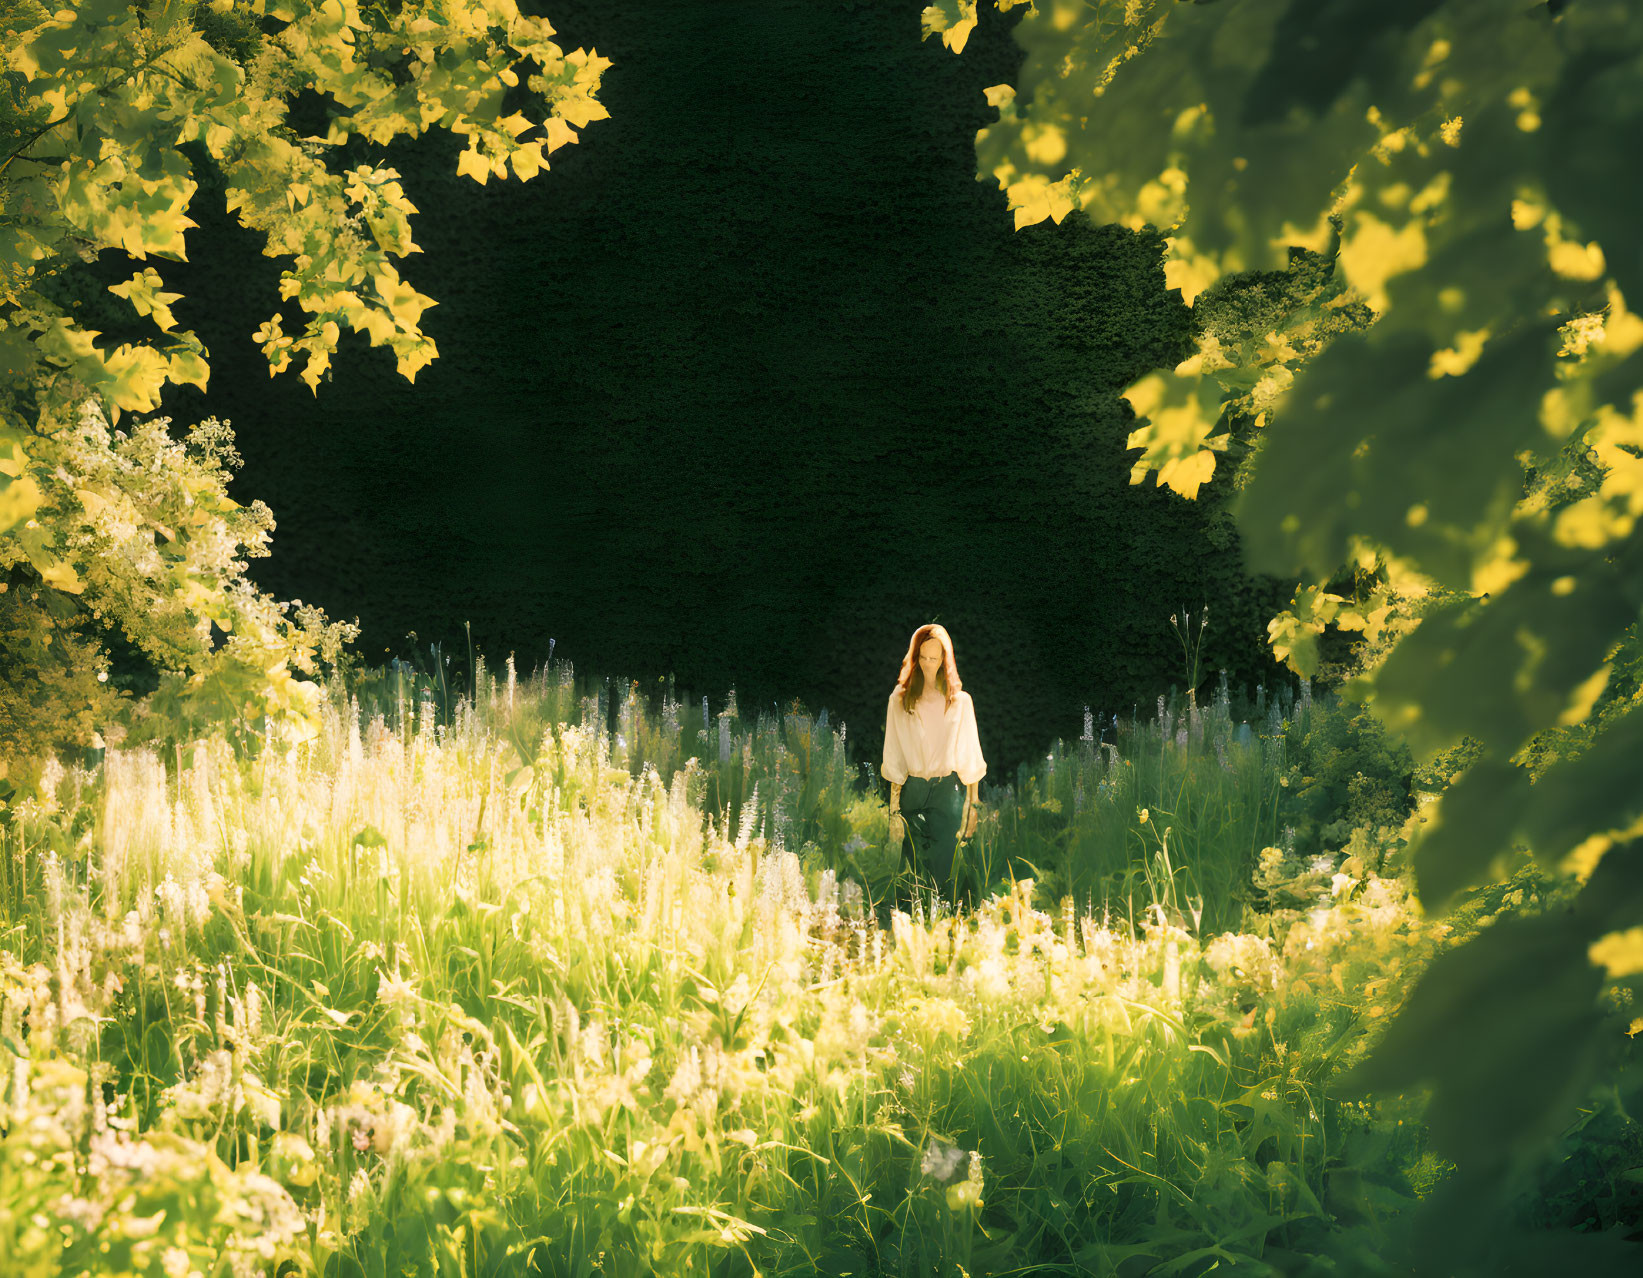 Person standing in sunlit forest clearing with tall wildflowers.